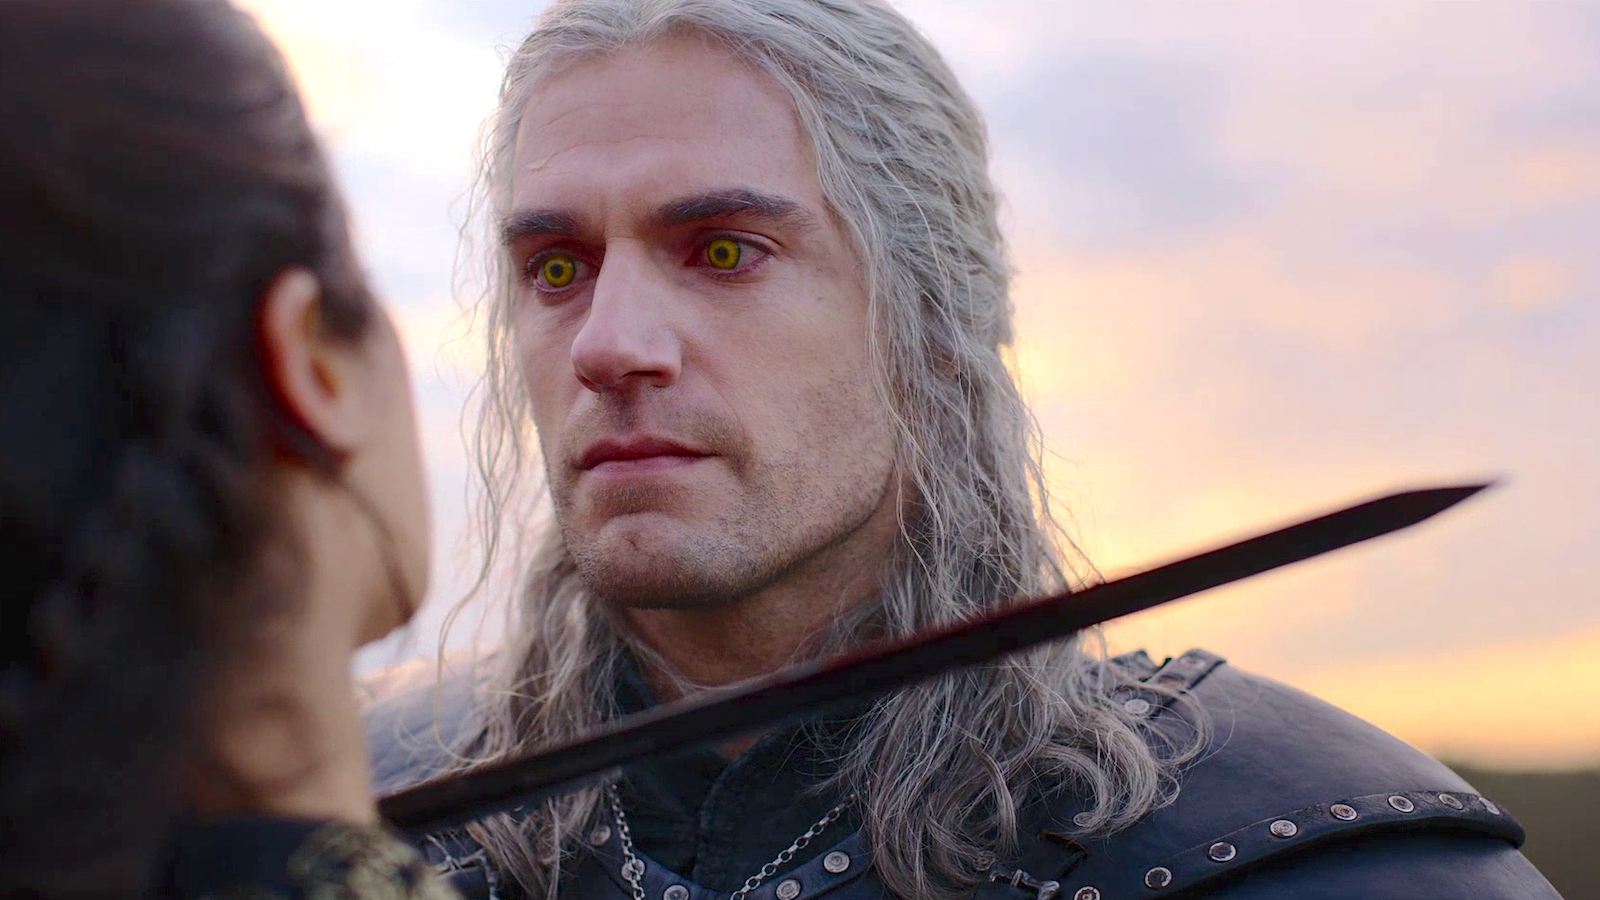 Geralt of Rivia (Henry Cavill) holding a sword to the neck of an unseen women, glaring at her with yellow eyes